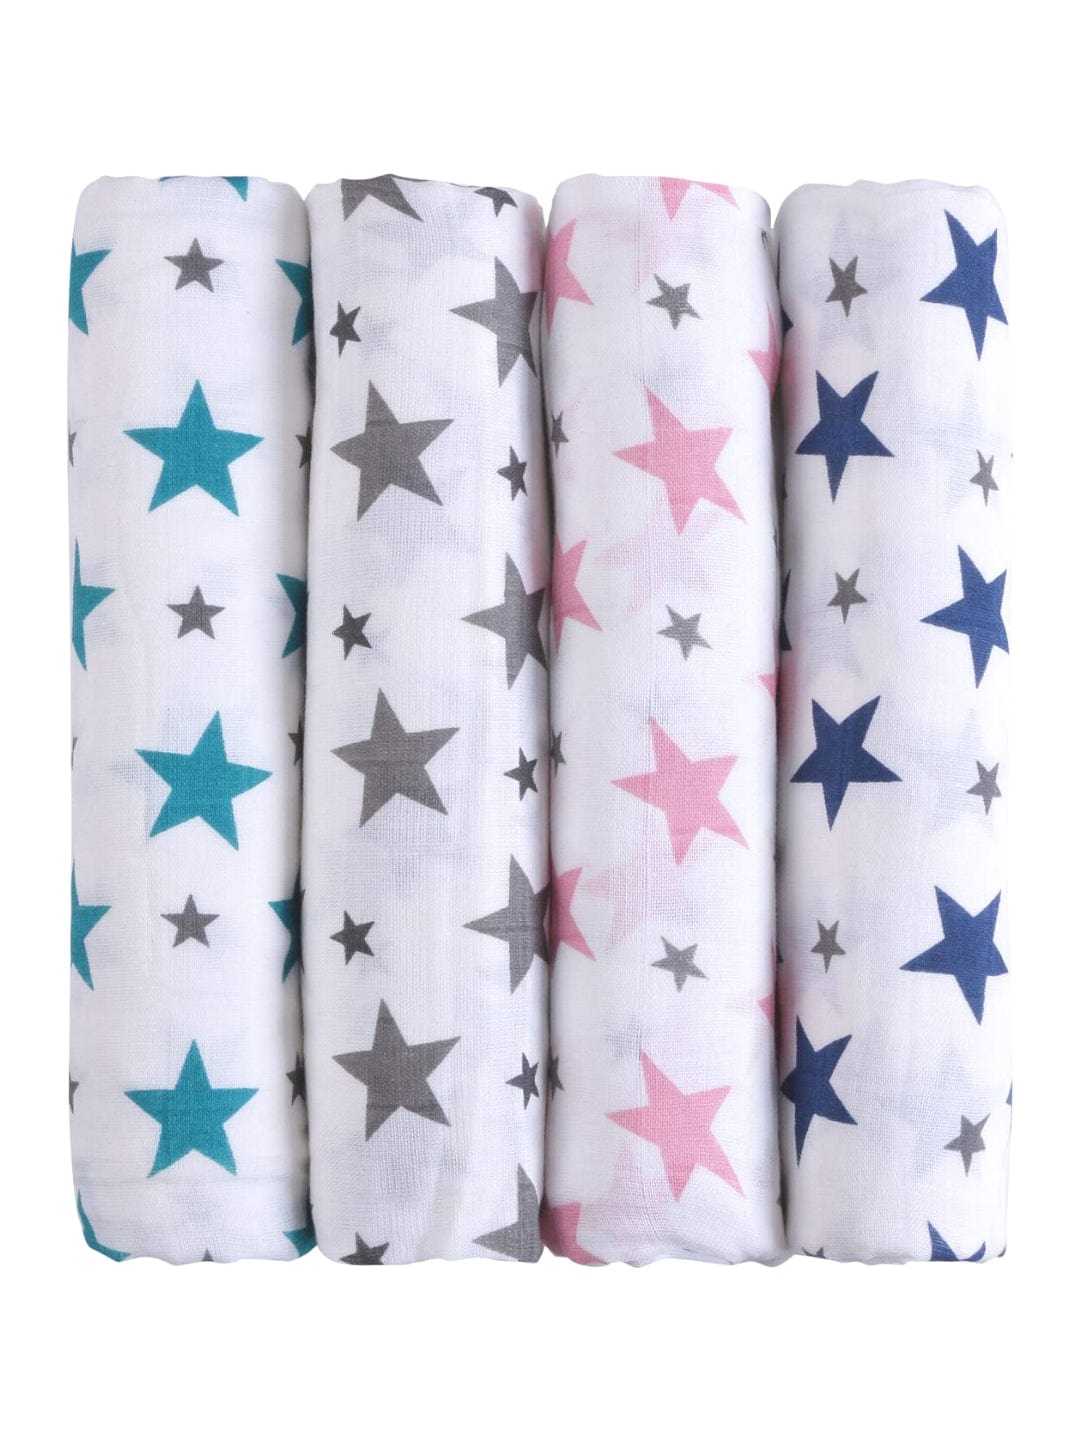 Stars 100% Cotton Muslin Swaddle Pack of 4 (Star Navy/pink/teal/grey)